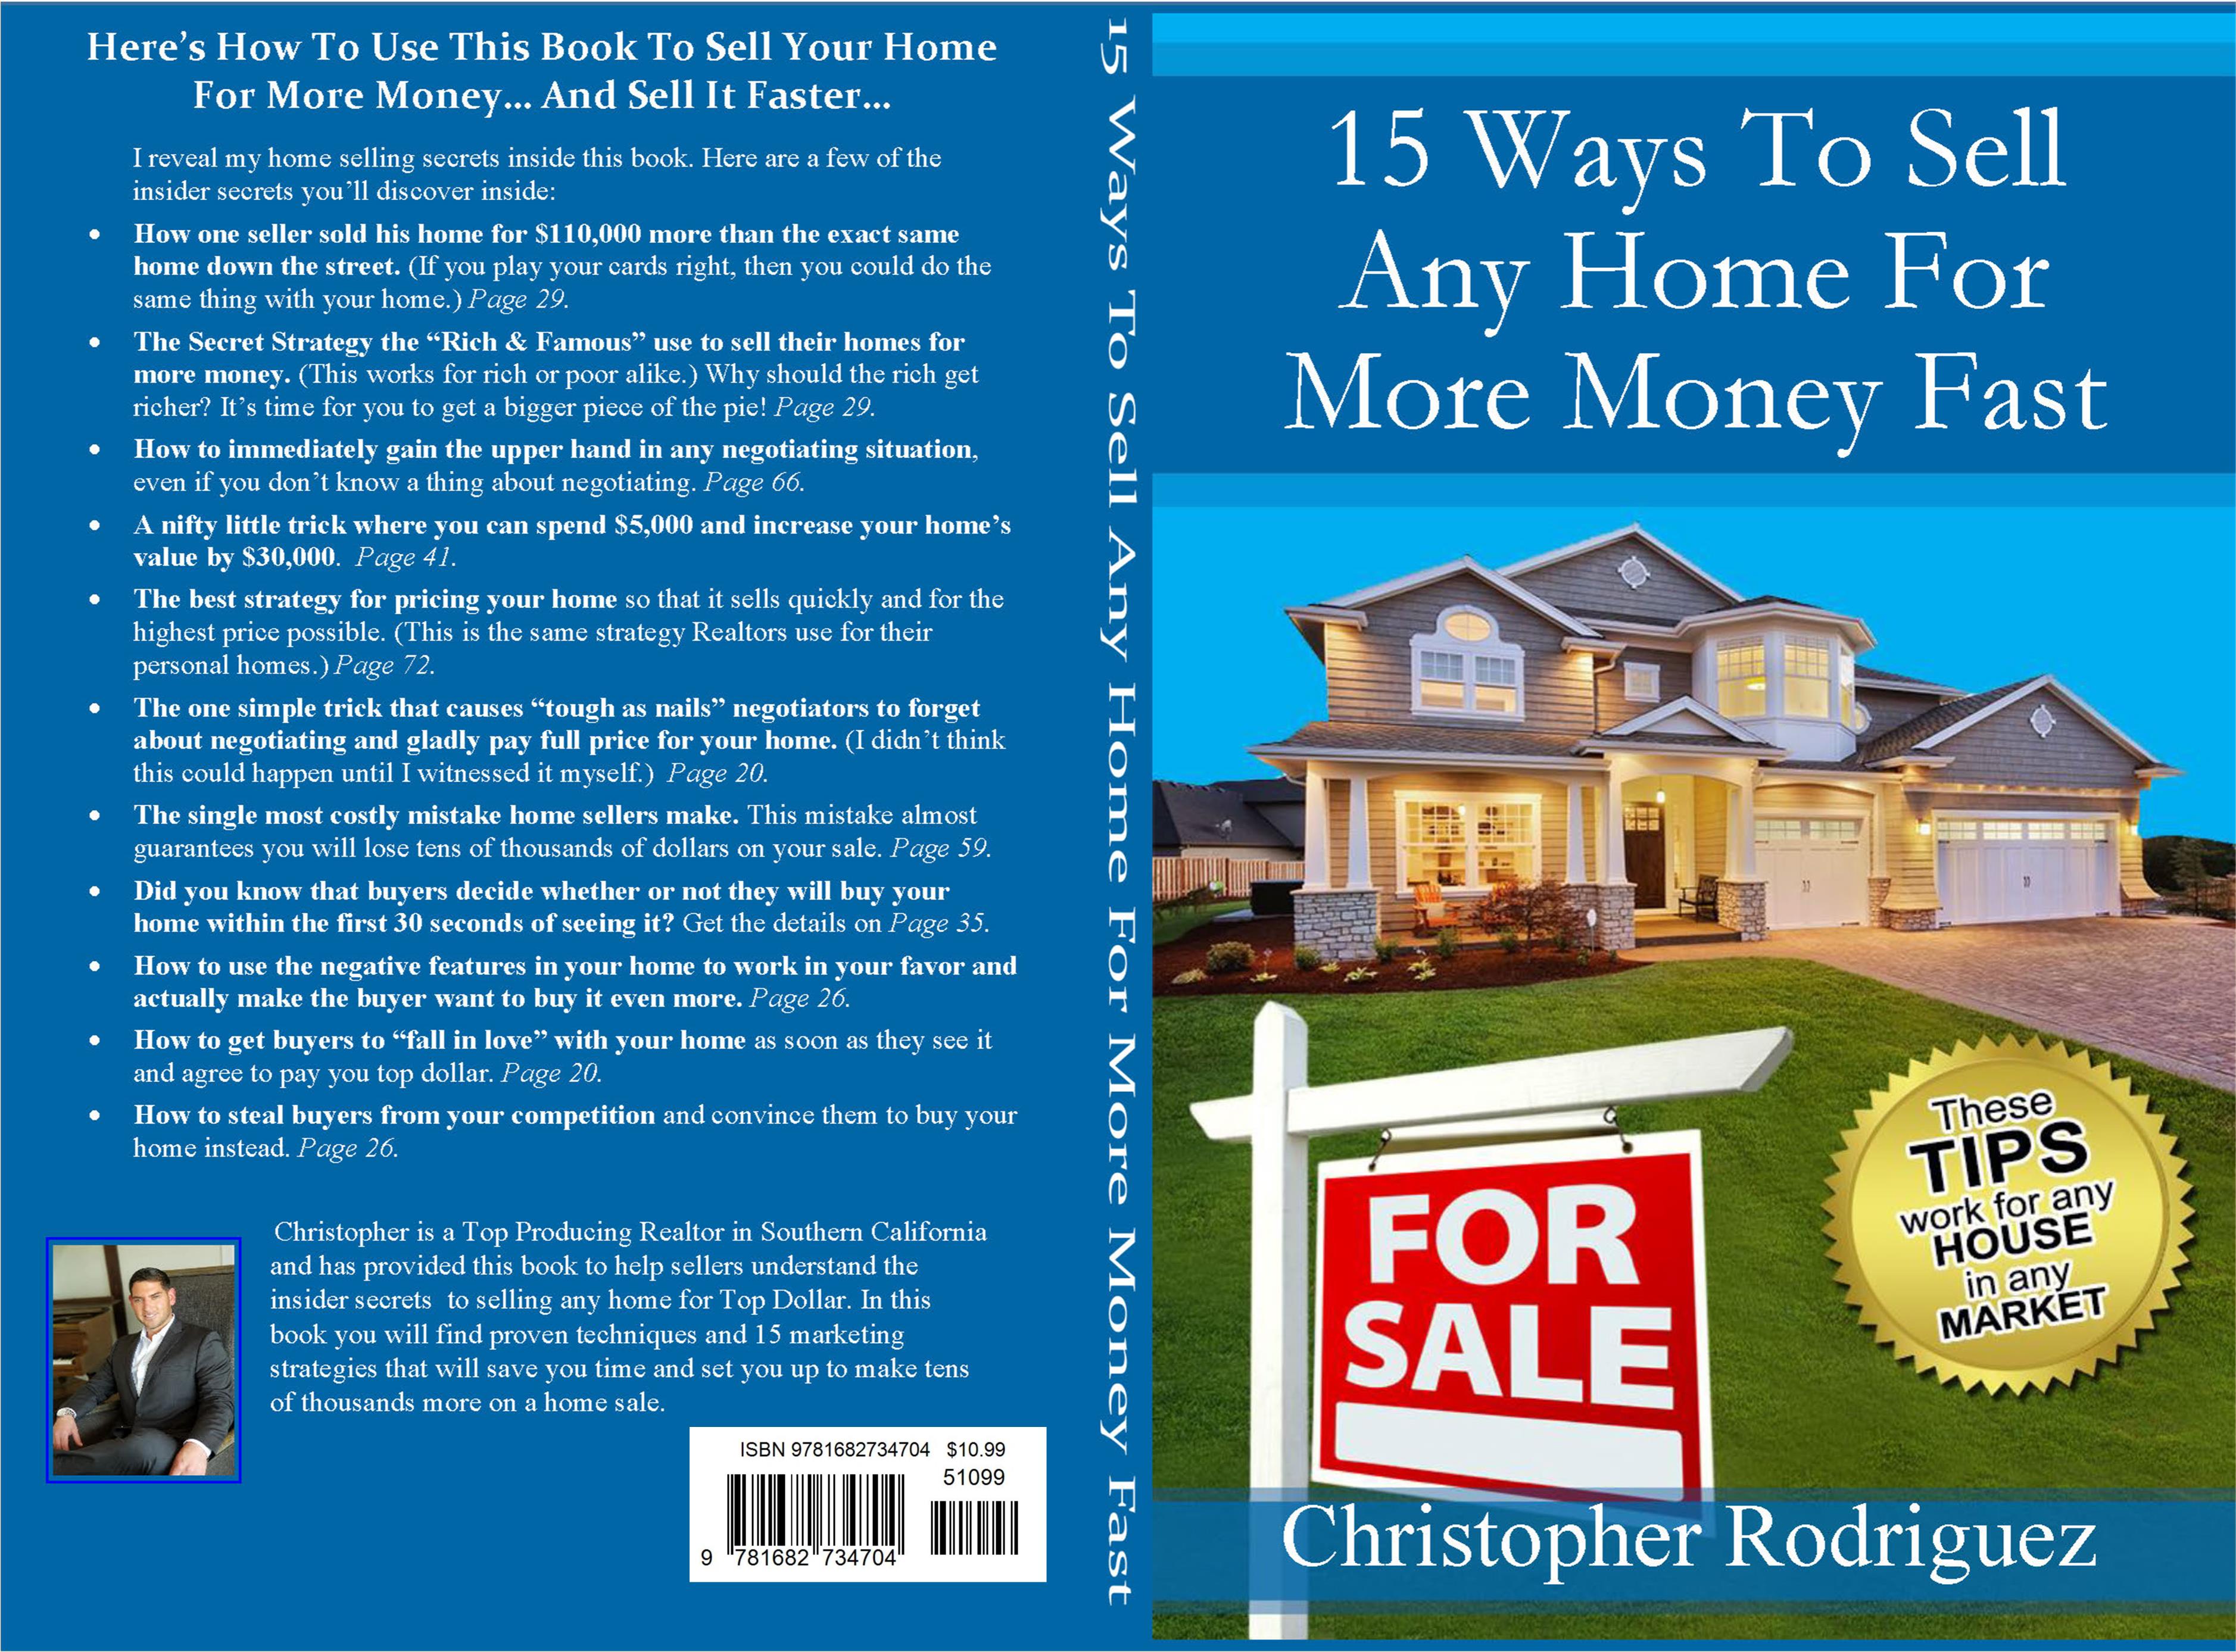 “15 Ways To Sell Any Home For More Money Fast” cover image